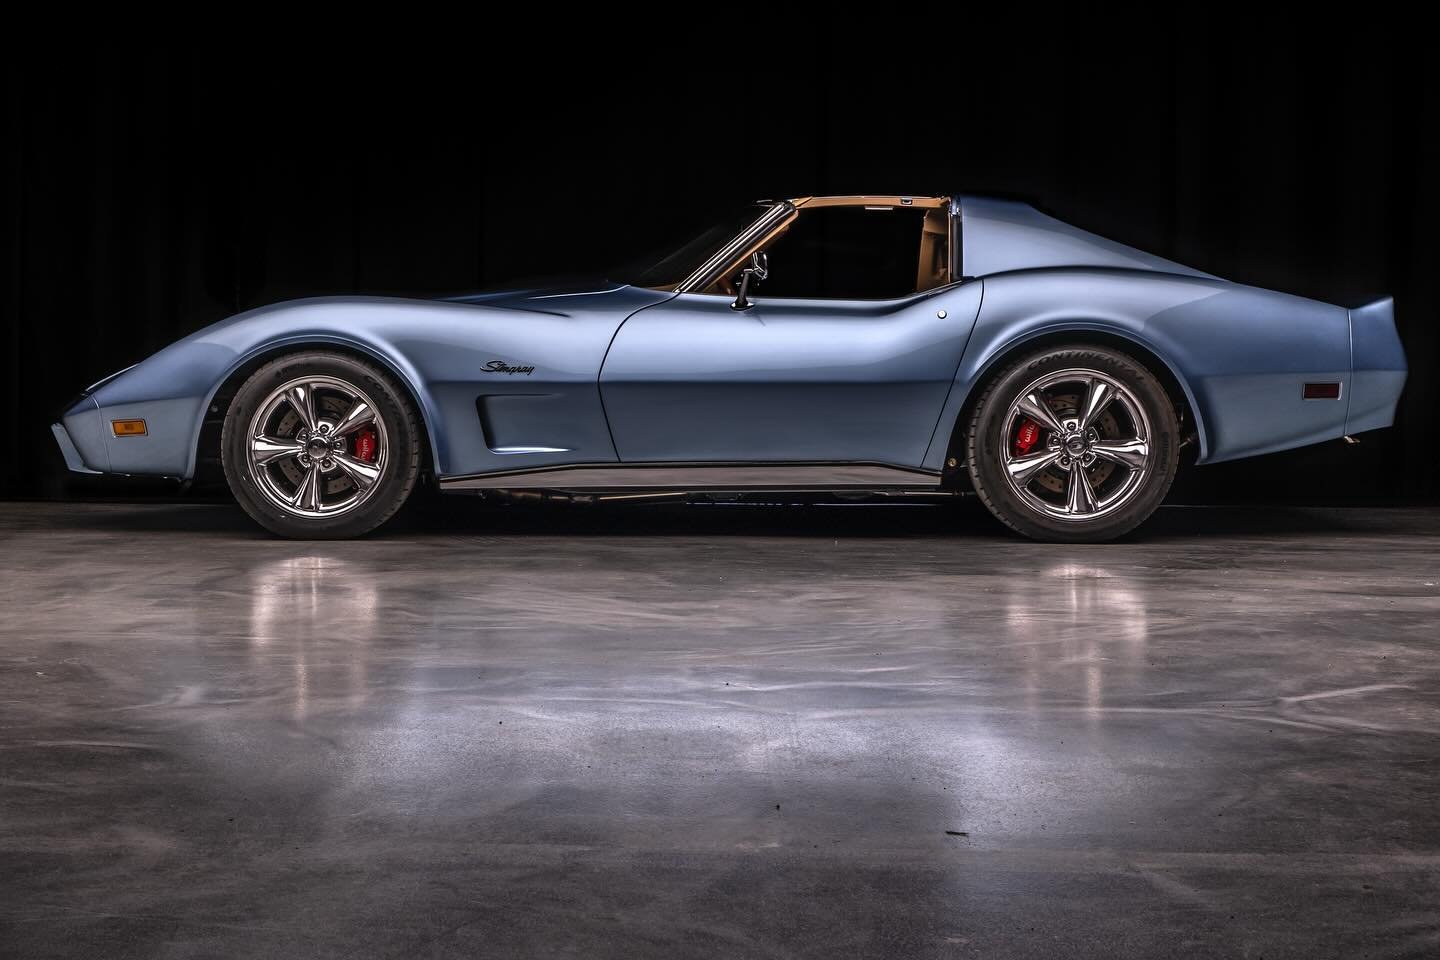 The 2024 Charles Schwab Challenge is less than a month away &amp; this 1975 Corvette is closer to meeting its future owner. Click the link in our bio to see the full gallery and learn more about this special car! 

#corvette #corvetterestomod #restom